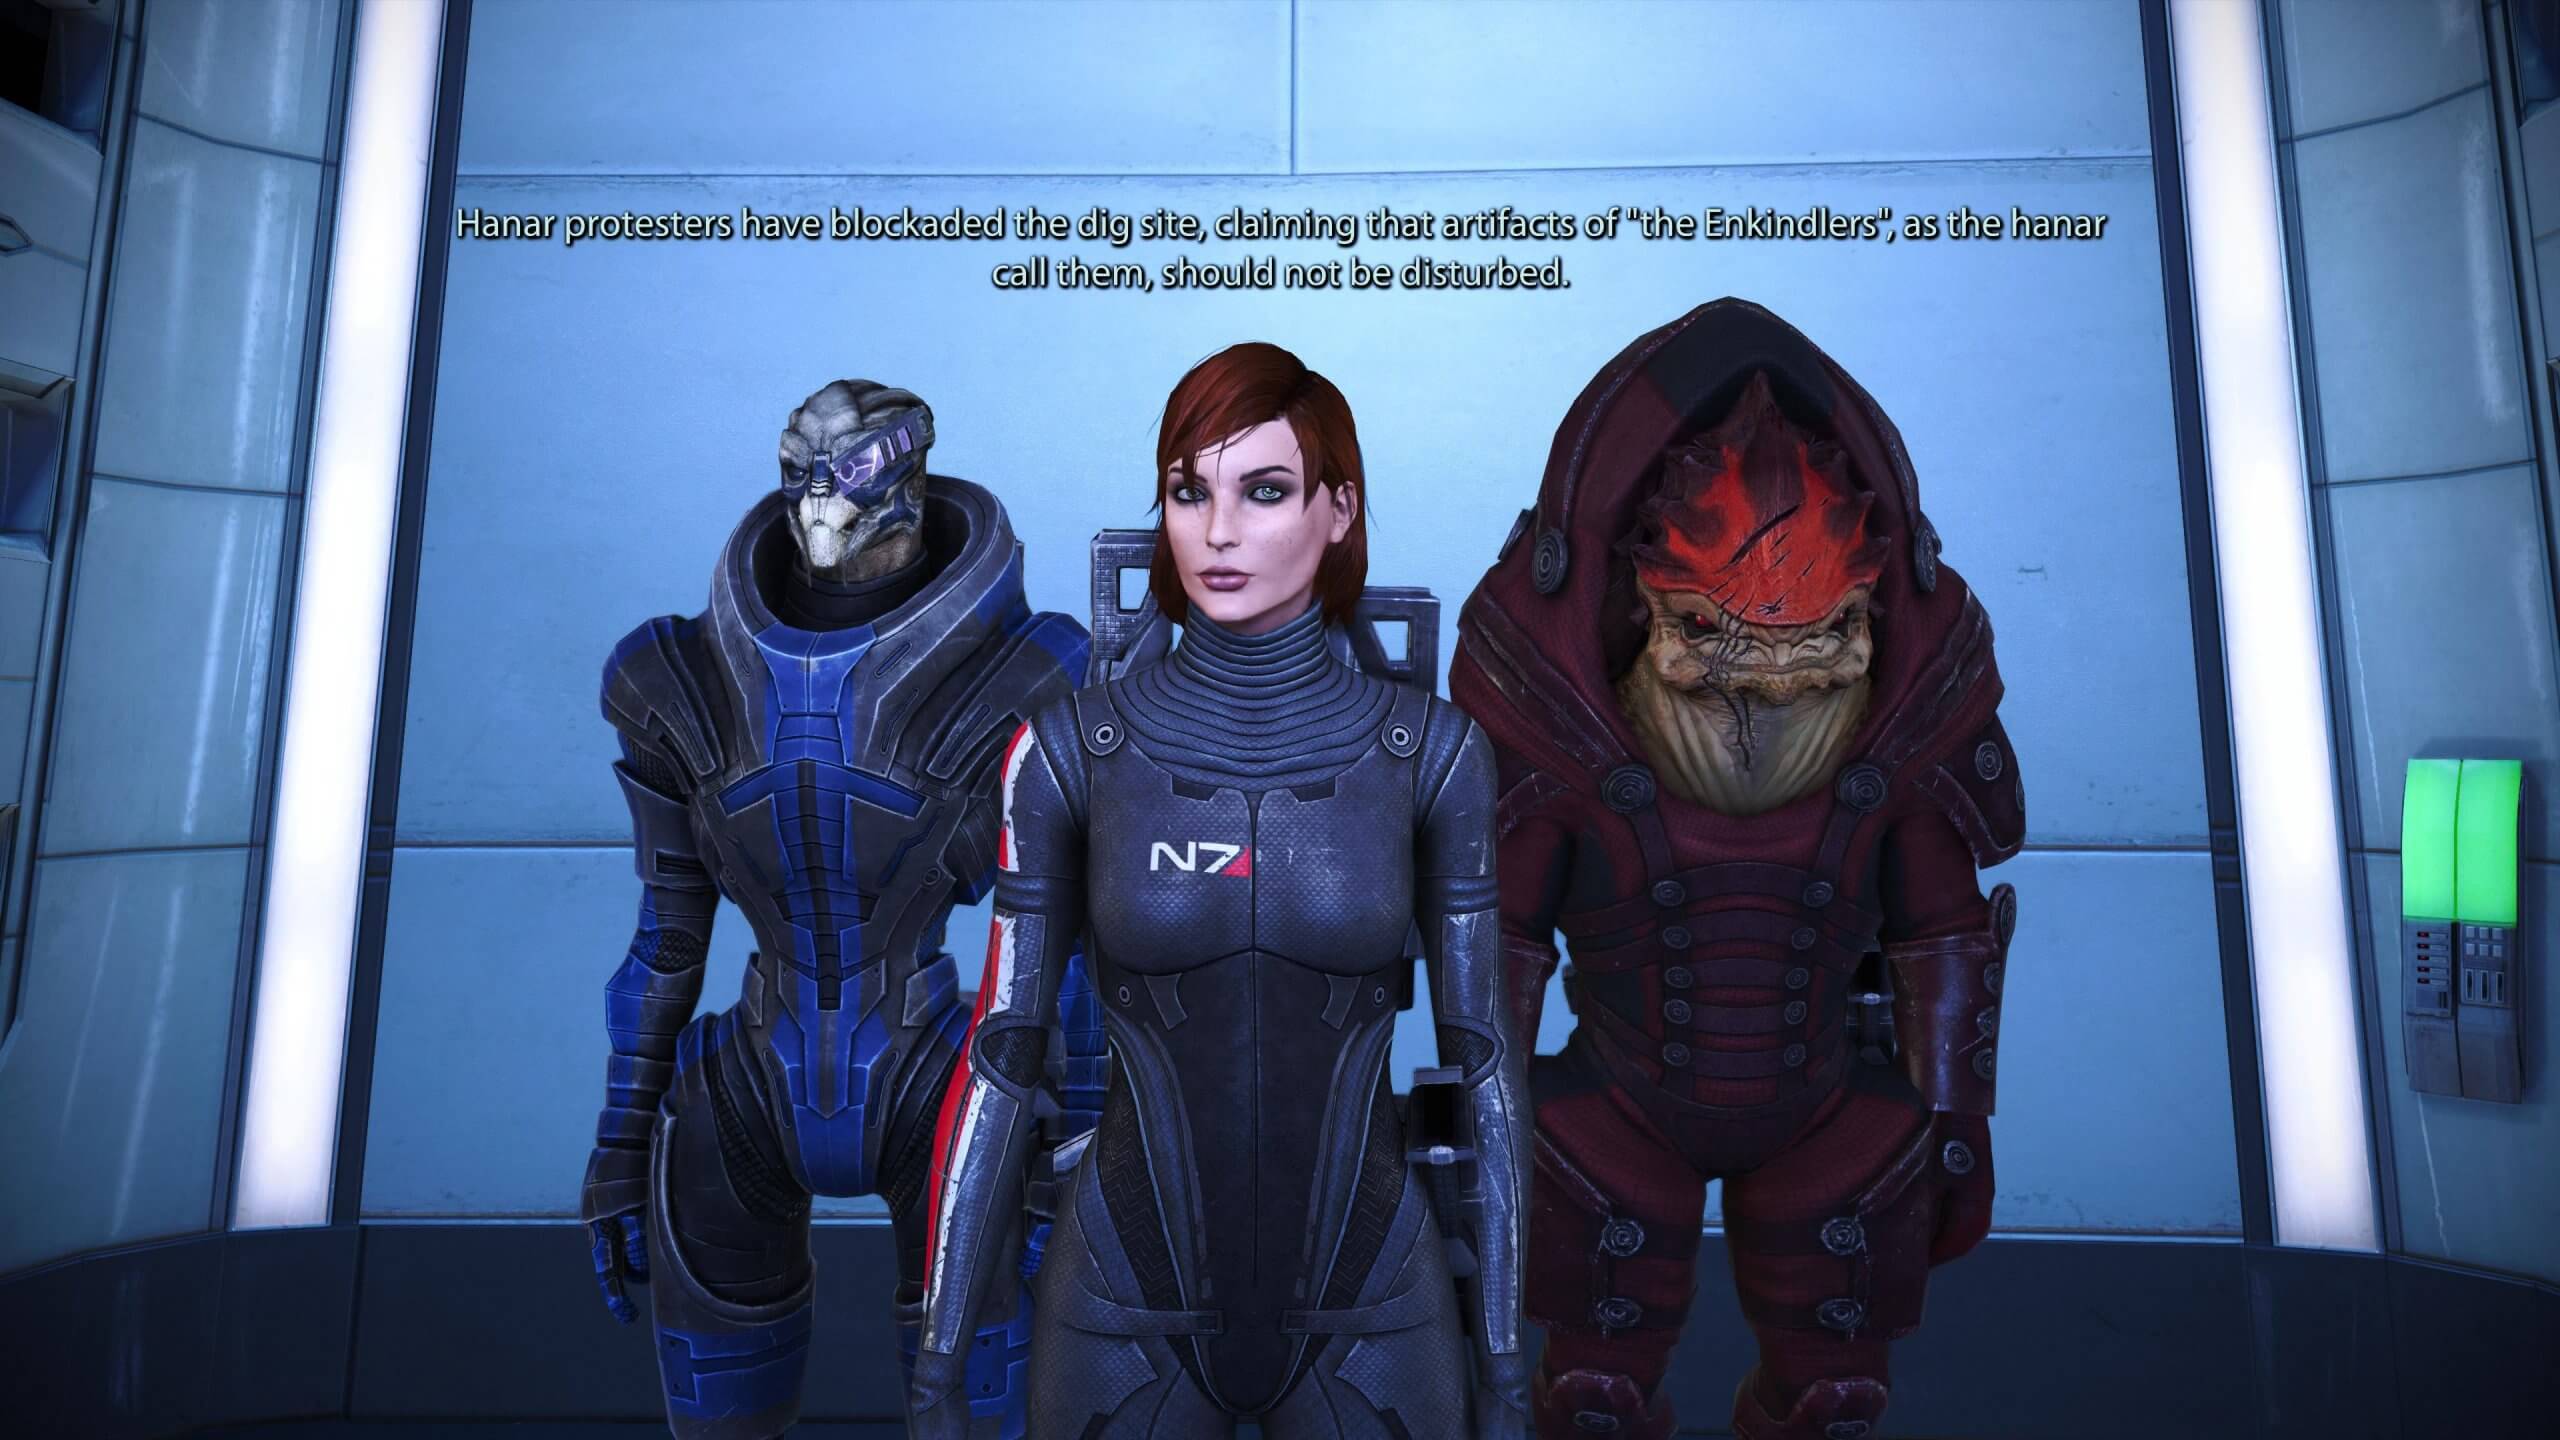 download the last version for android Mass Effect